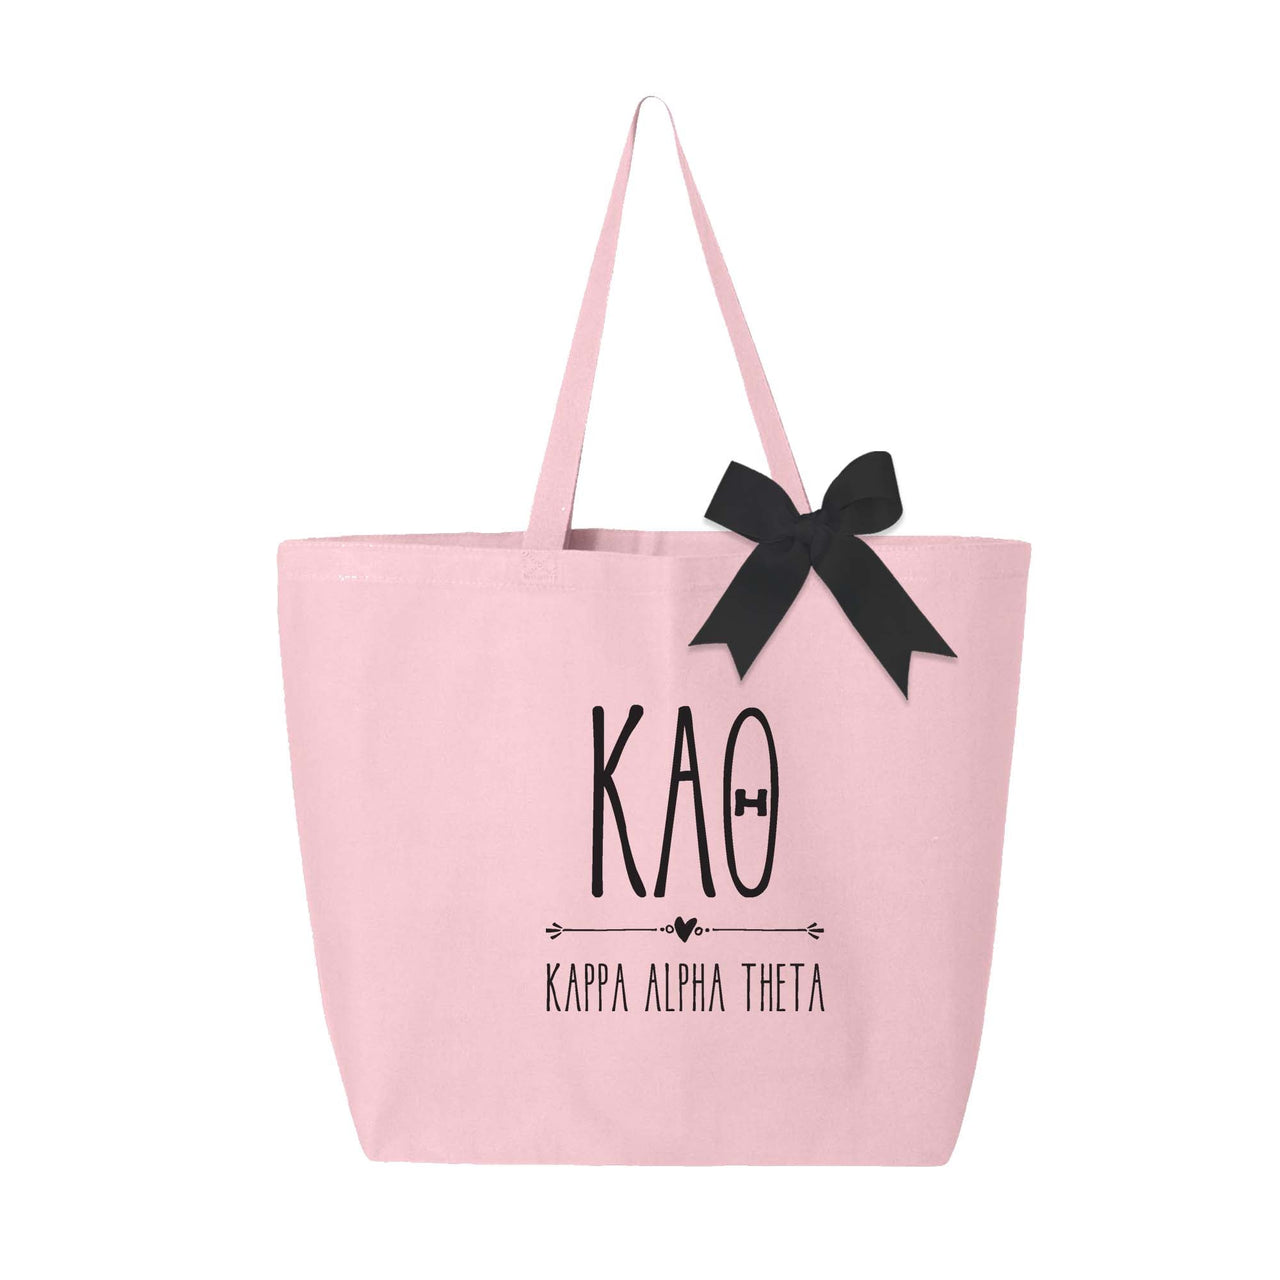 Kappa Alpha Theta sorority letters and name custom printed on pink canvas tote bag with black bow